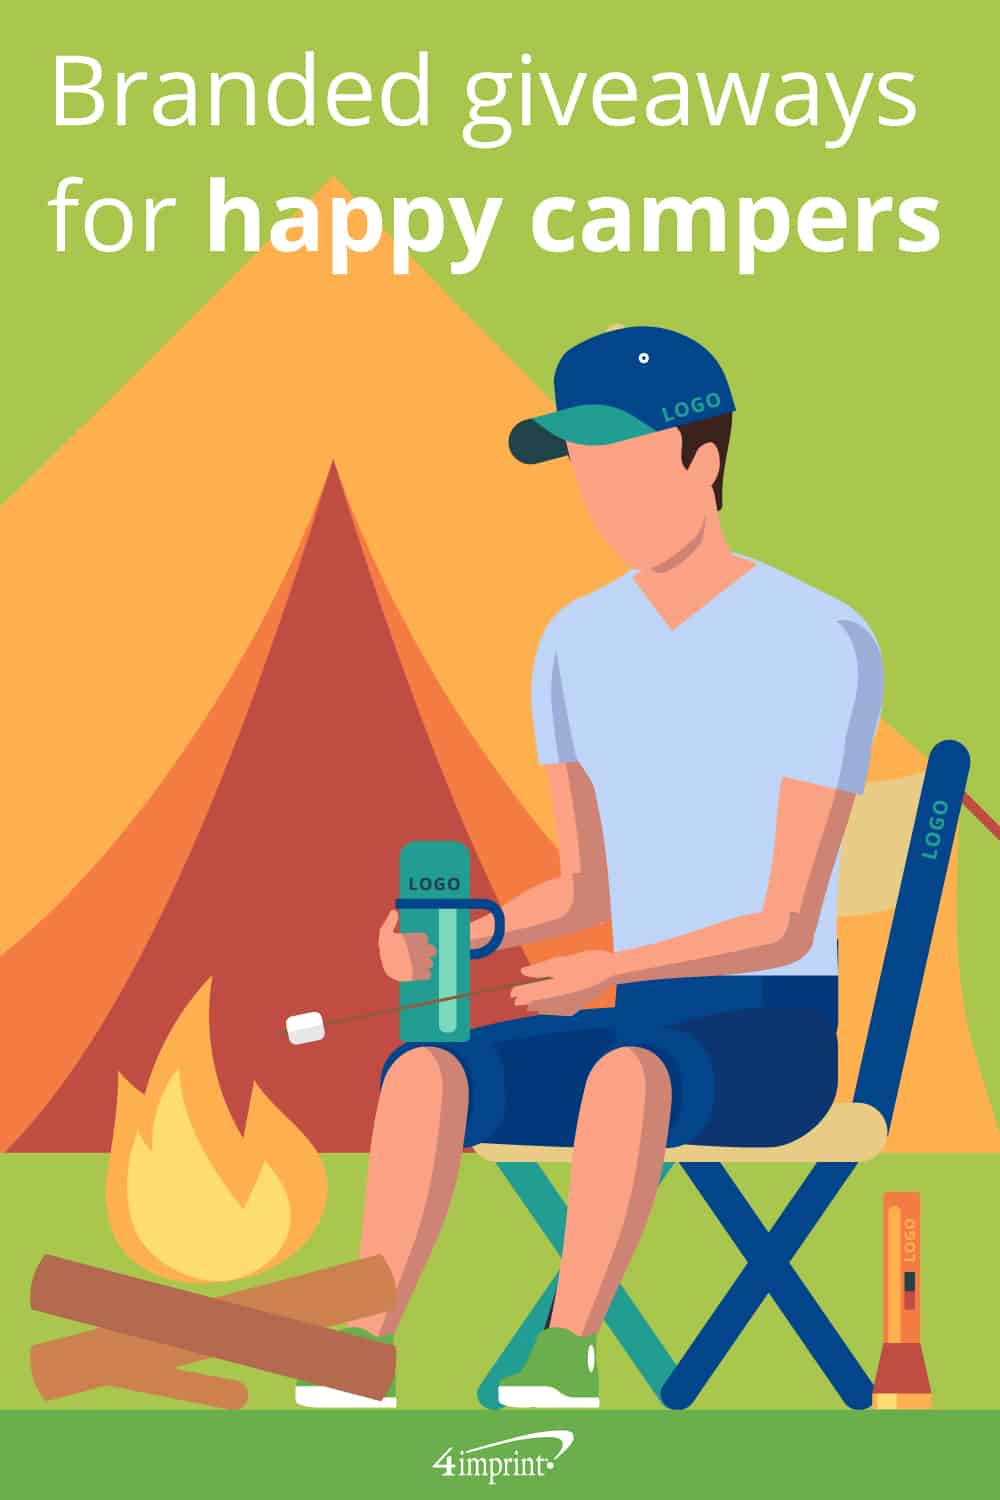 Man sitting in logoed camping chair at campfire with logoed water bottle and hat.